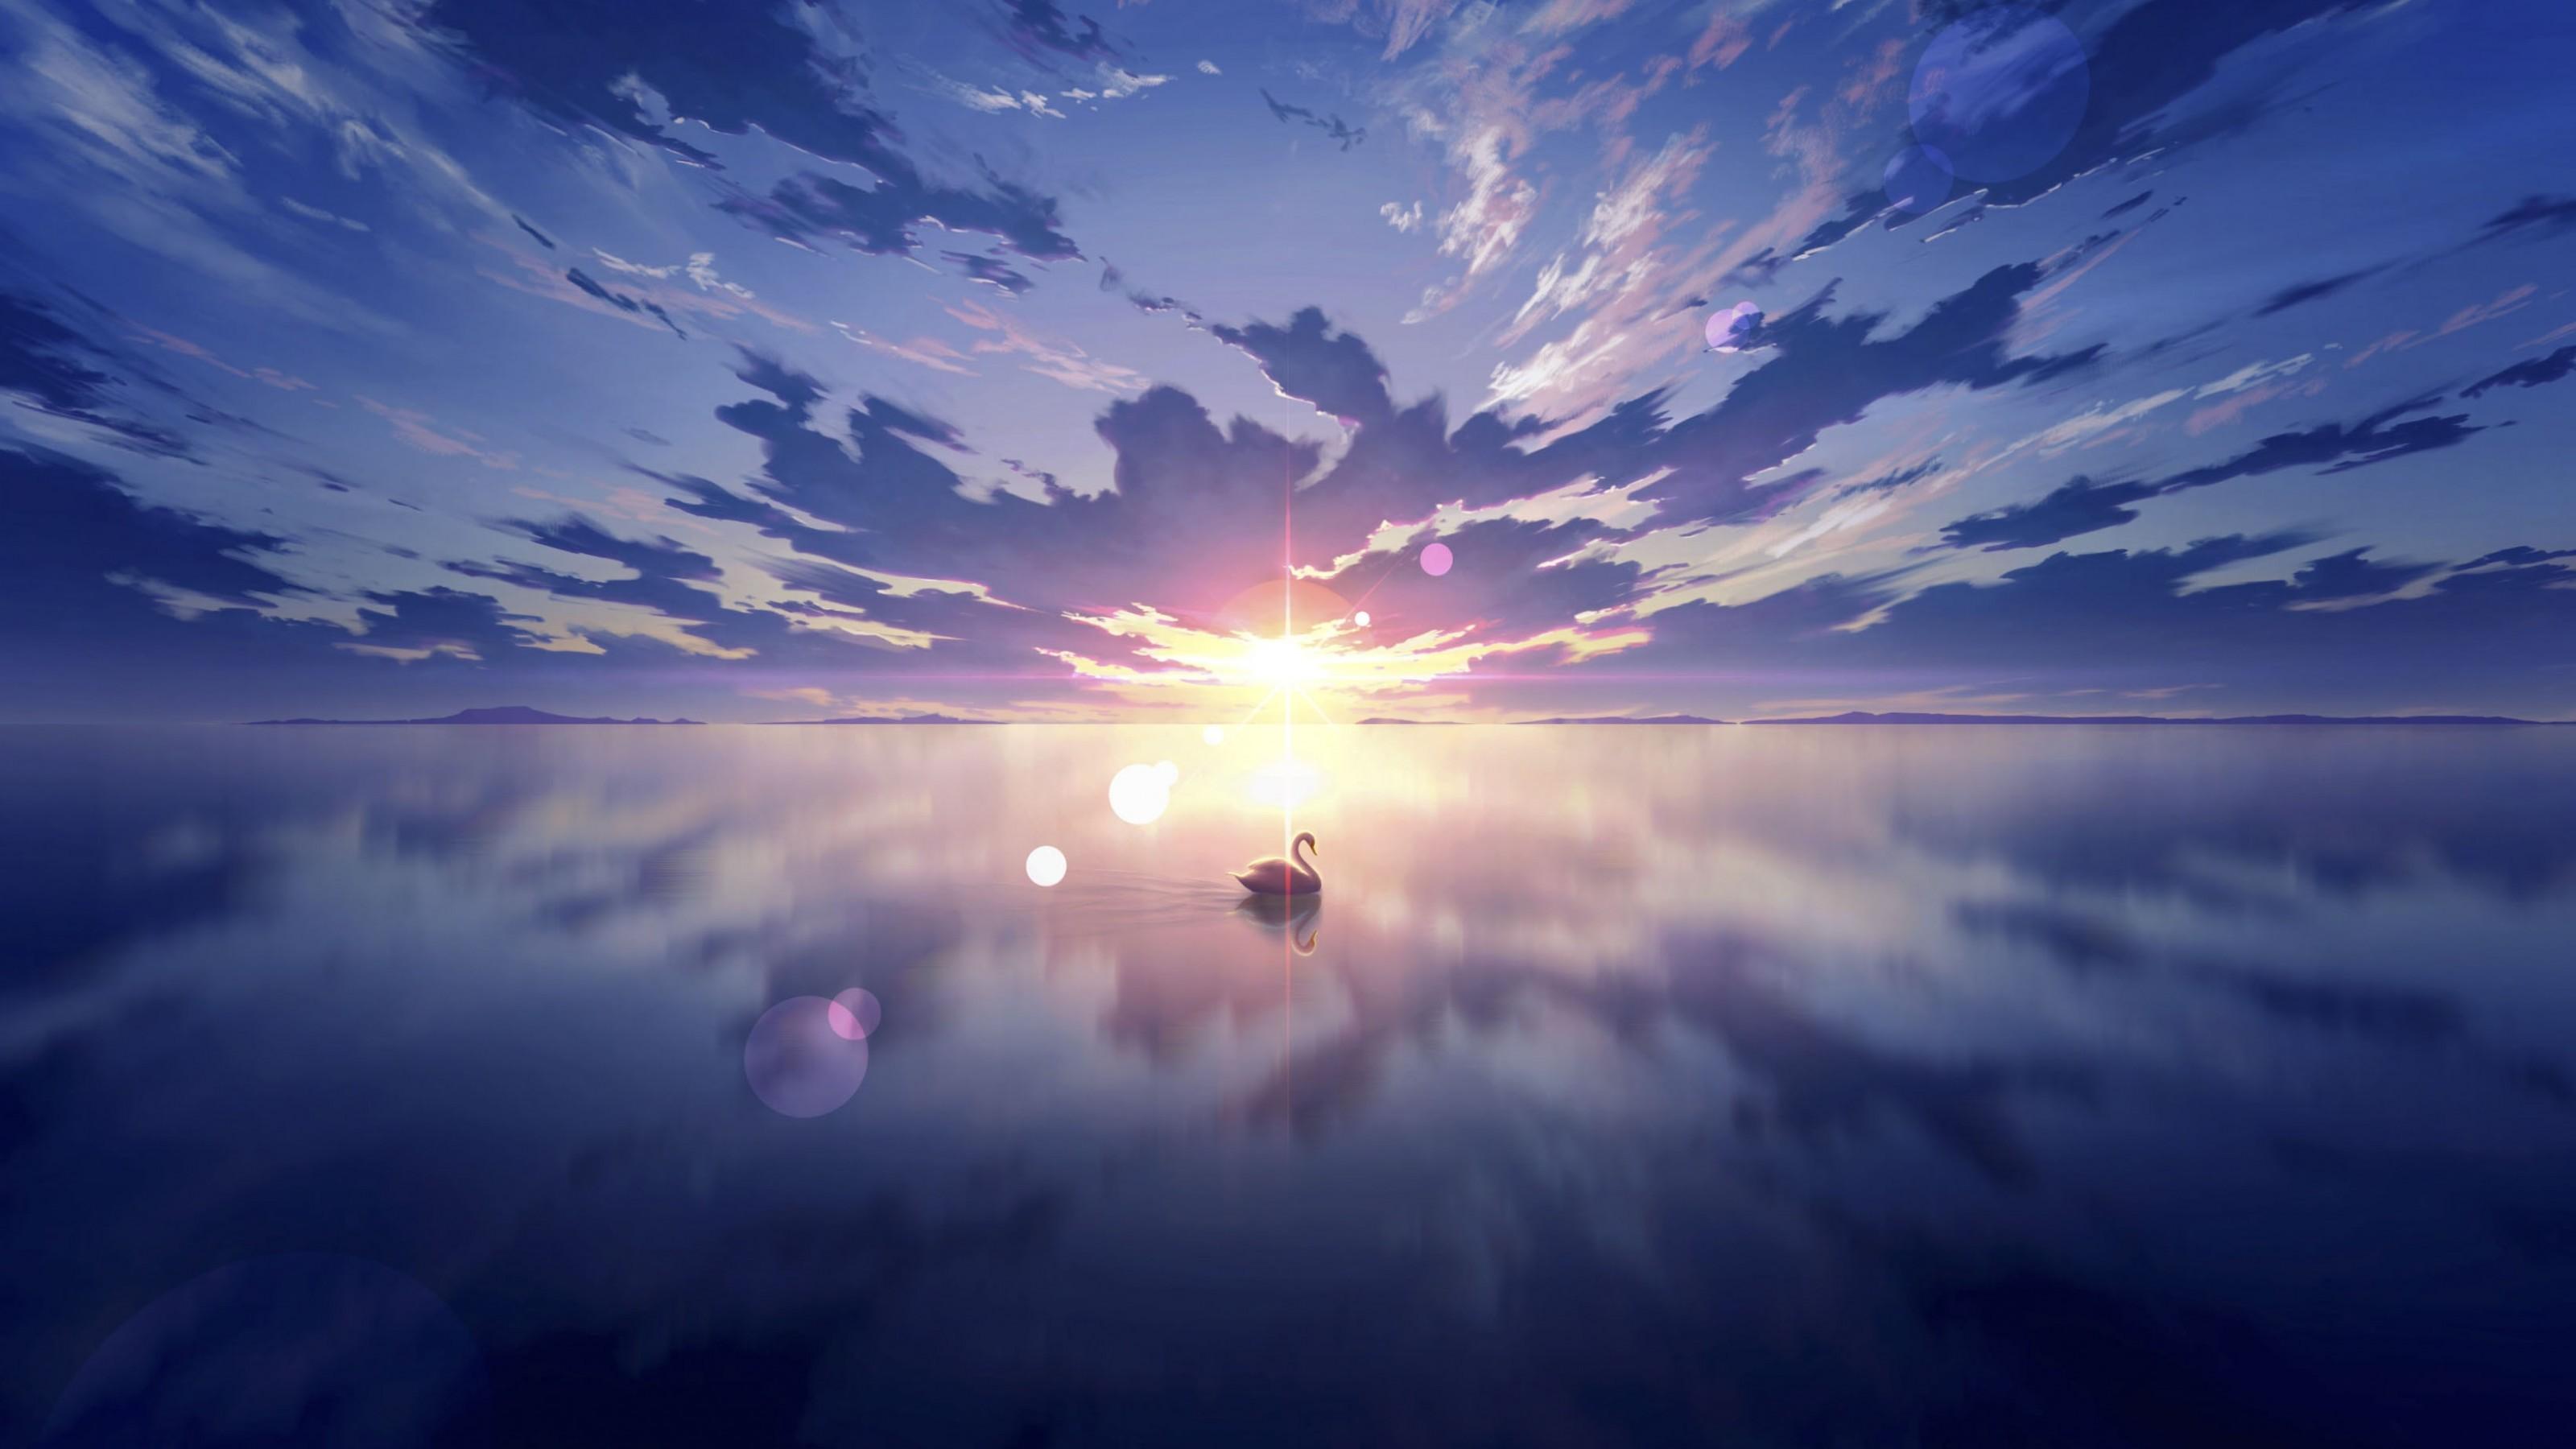 4k Scenery Sunset Anime Wallpapers - Wallpaper Cave